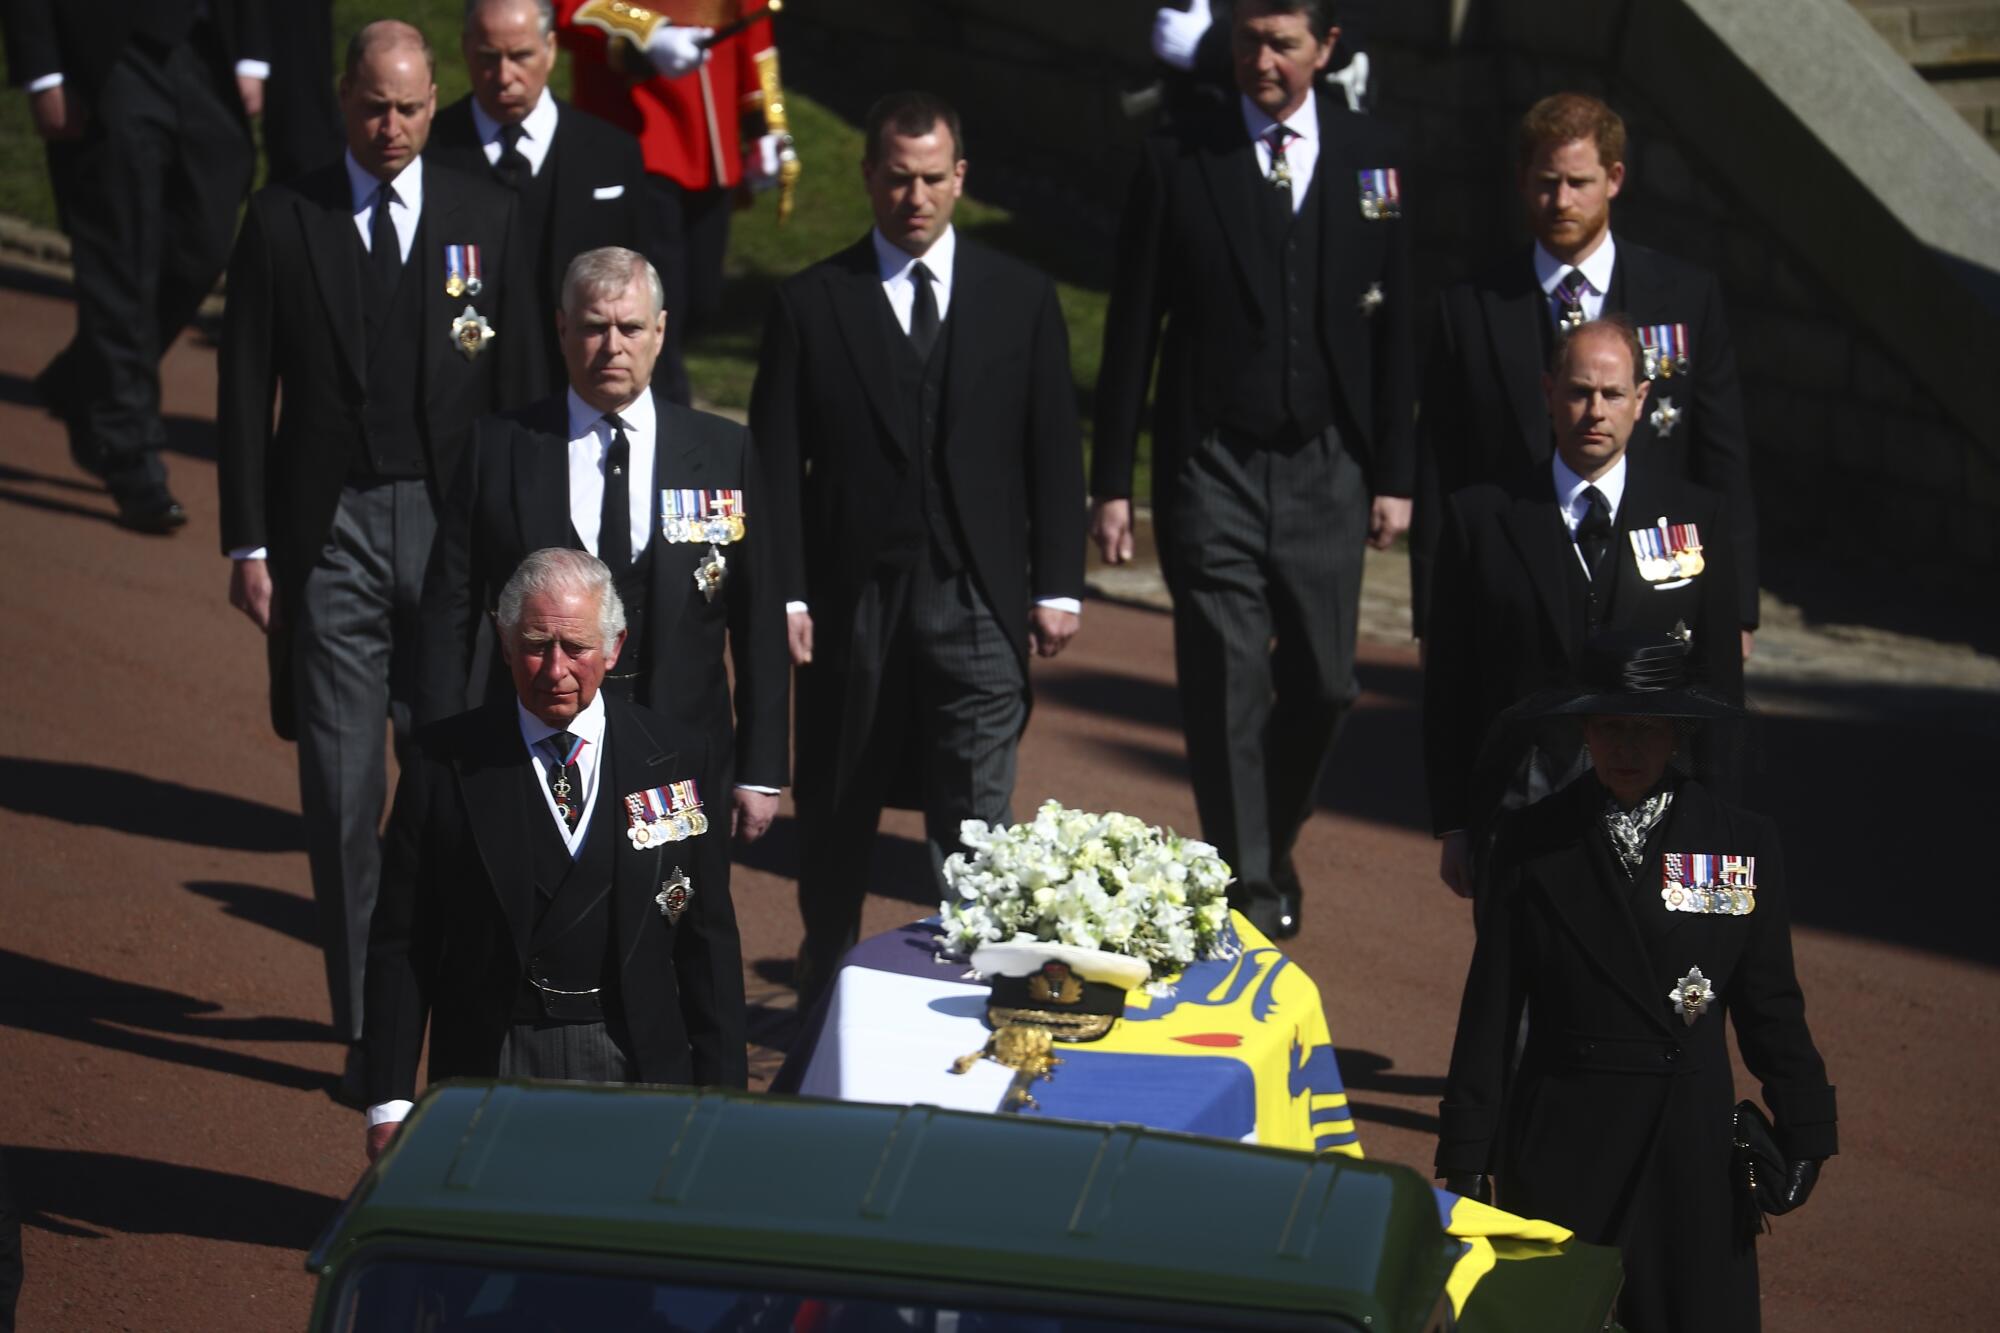 Members of the royal family walk behind the coffin of Prince Philip as it is driven at Windsor Castle.